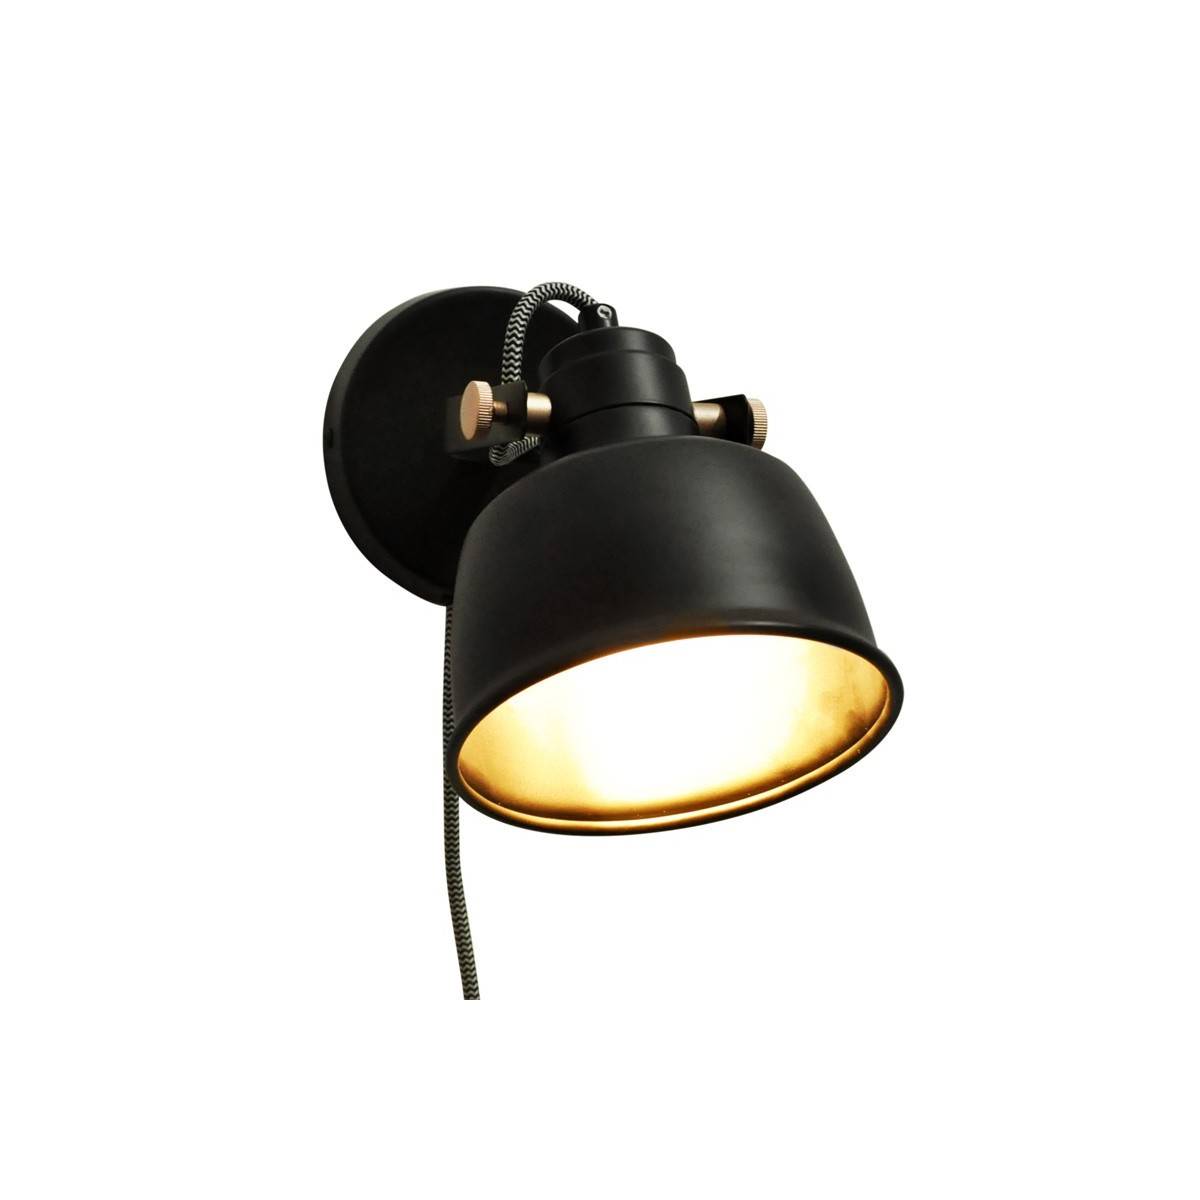 KUKKA" interior wall light with switch and socket